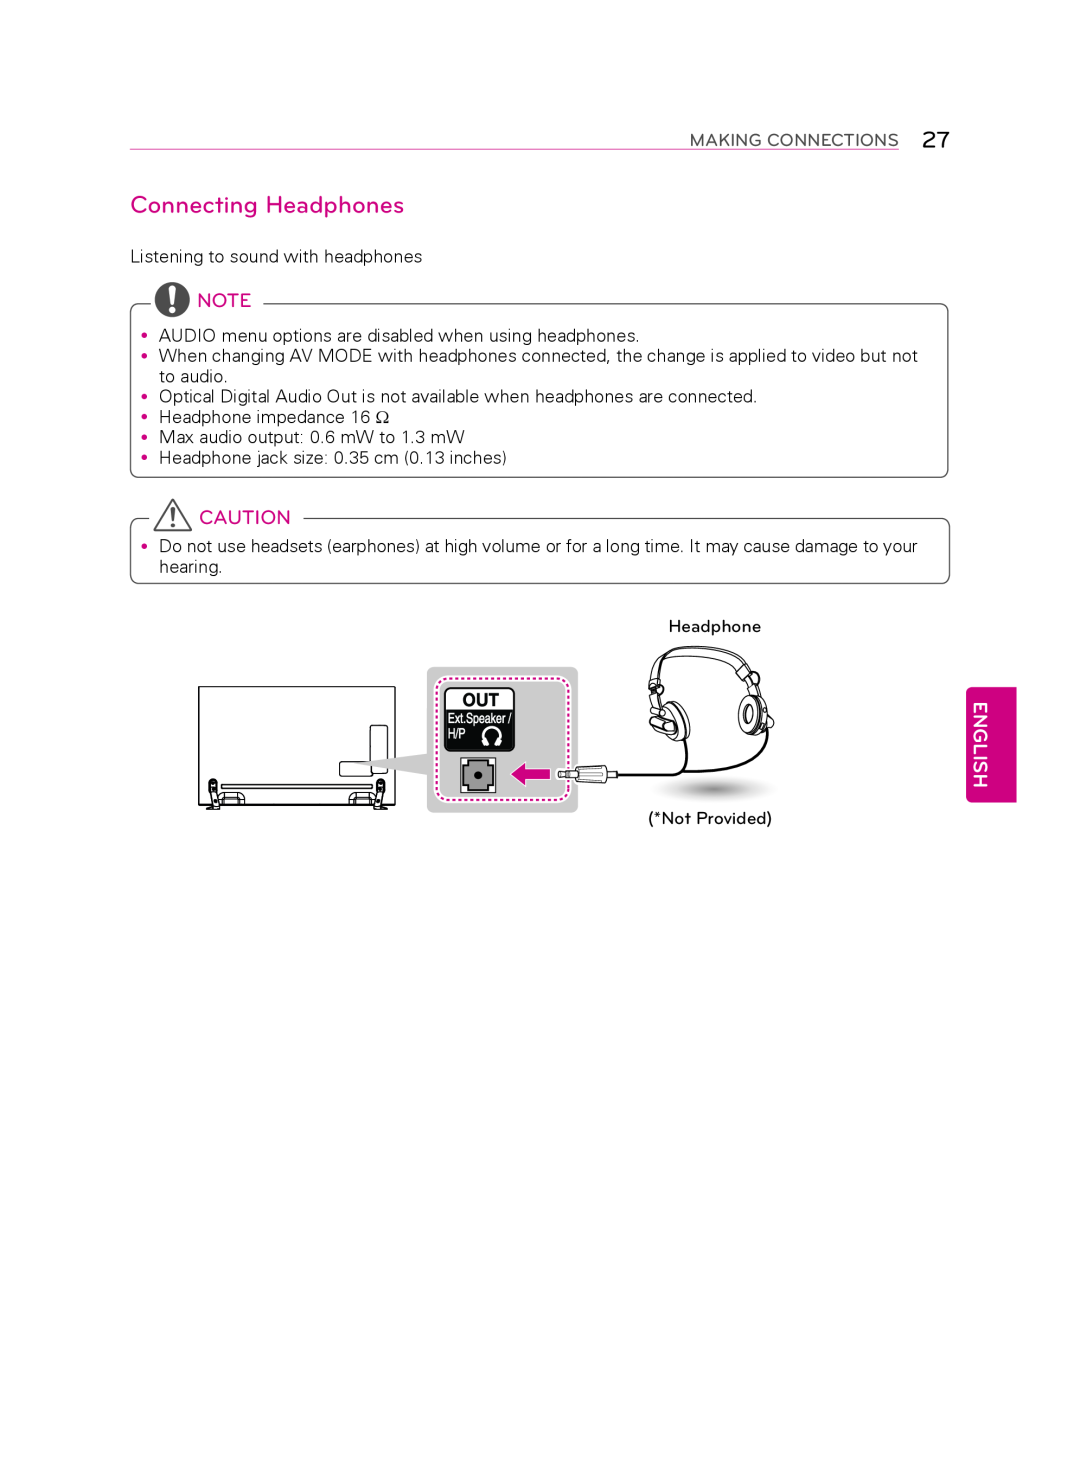 LG Electronics 55LA9650 owner manual Connecting Headphones, English, Making Connections 